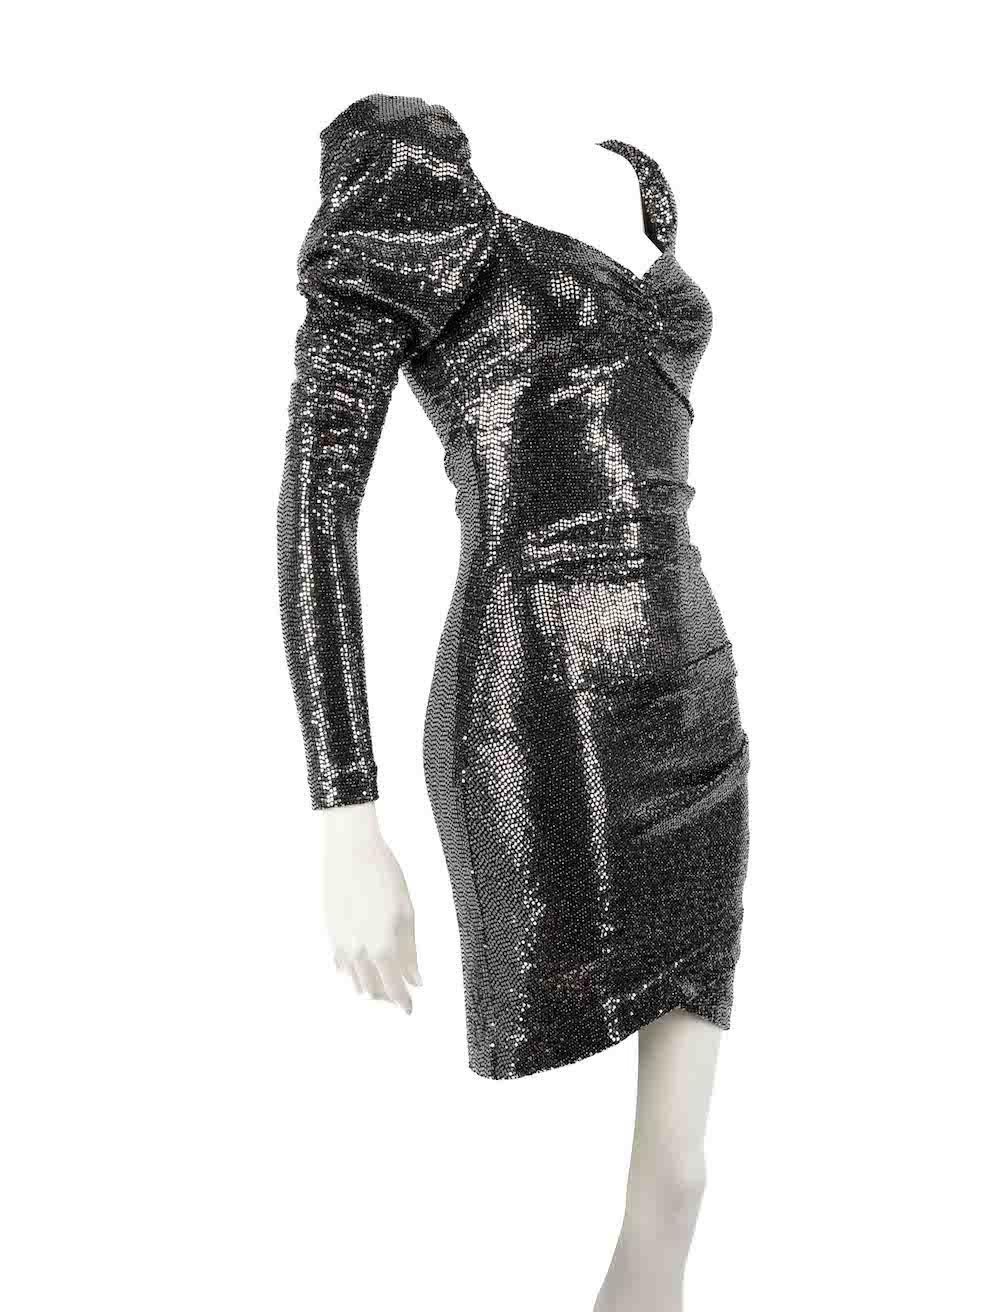 CONDITION is Never worn, with tags. No visible wear to dress is evident on this new Aniye By designer resale item.
 
 
 
 Details
 
 
 Silver
 
 Synthetic
 
 Dress
 
 Mini
 
 Metallic sequin embellishment
 
 Shoulder pads
 
 Sweetheart neckline
 
